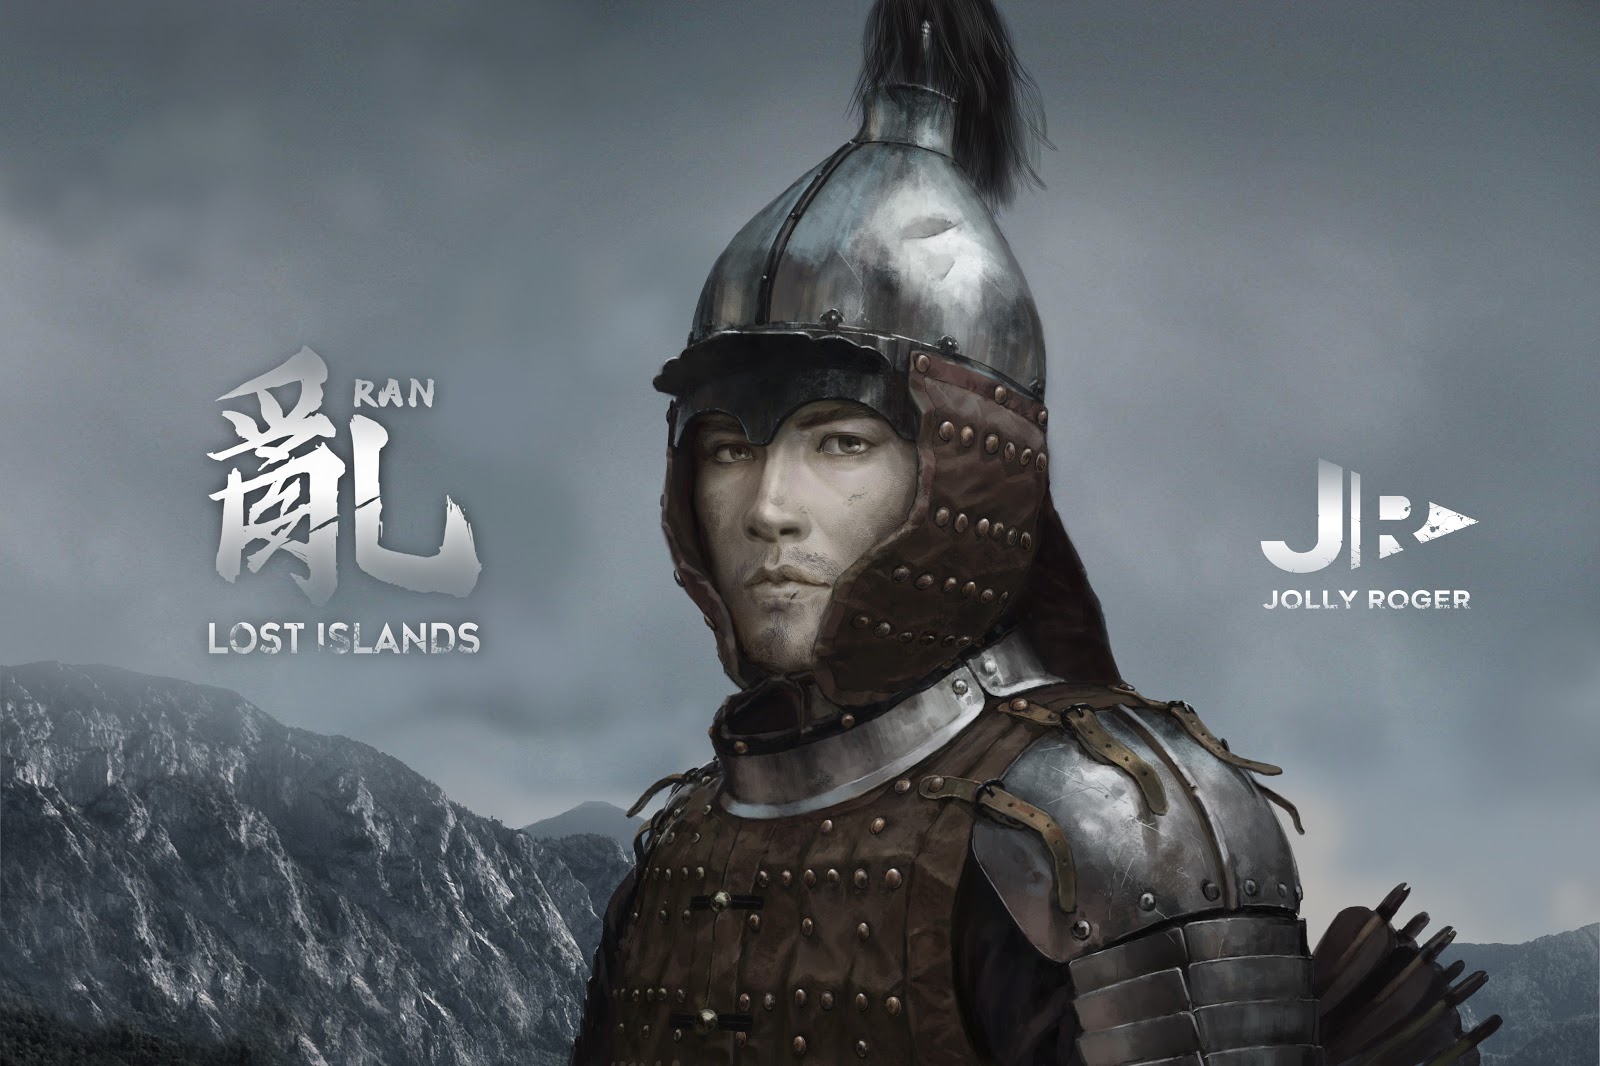 RAN: Lost Islands is basically For Honor battle royale, free